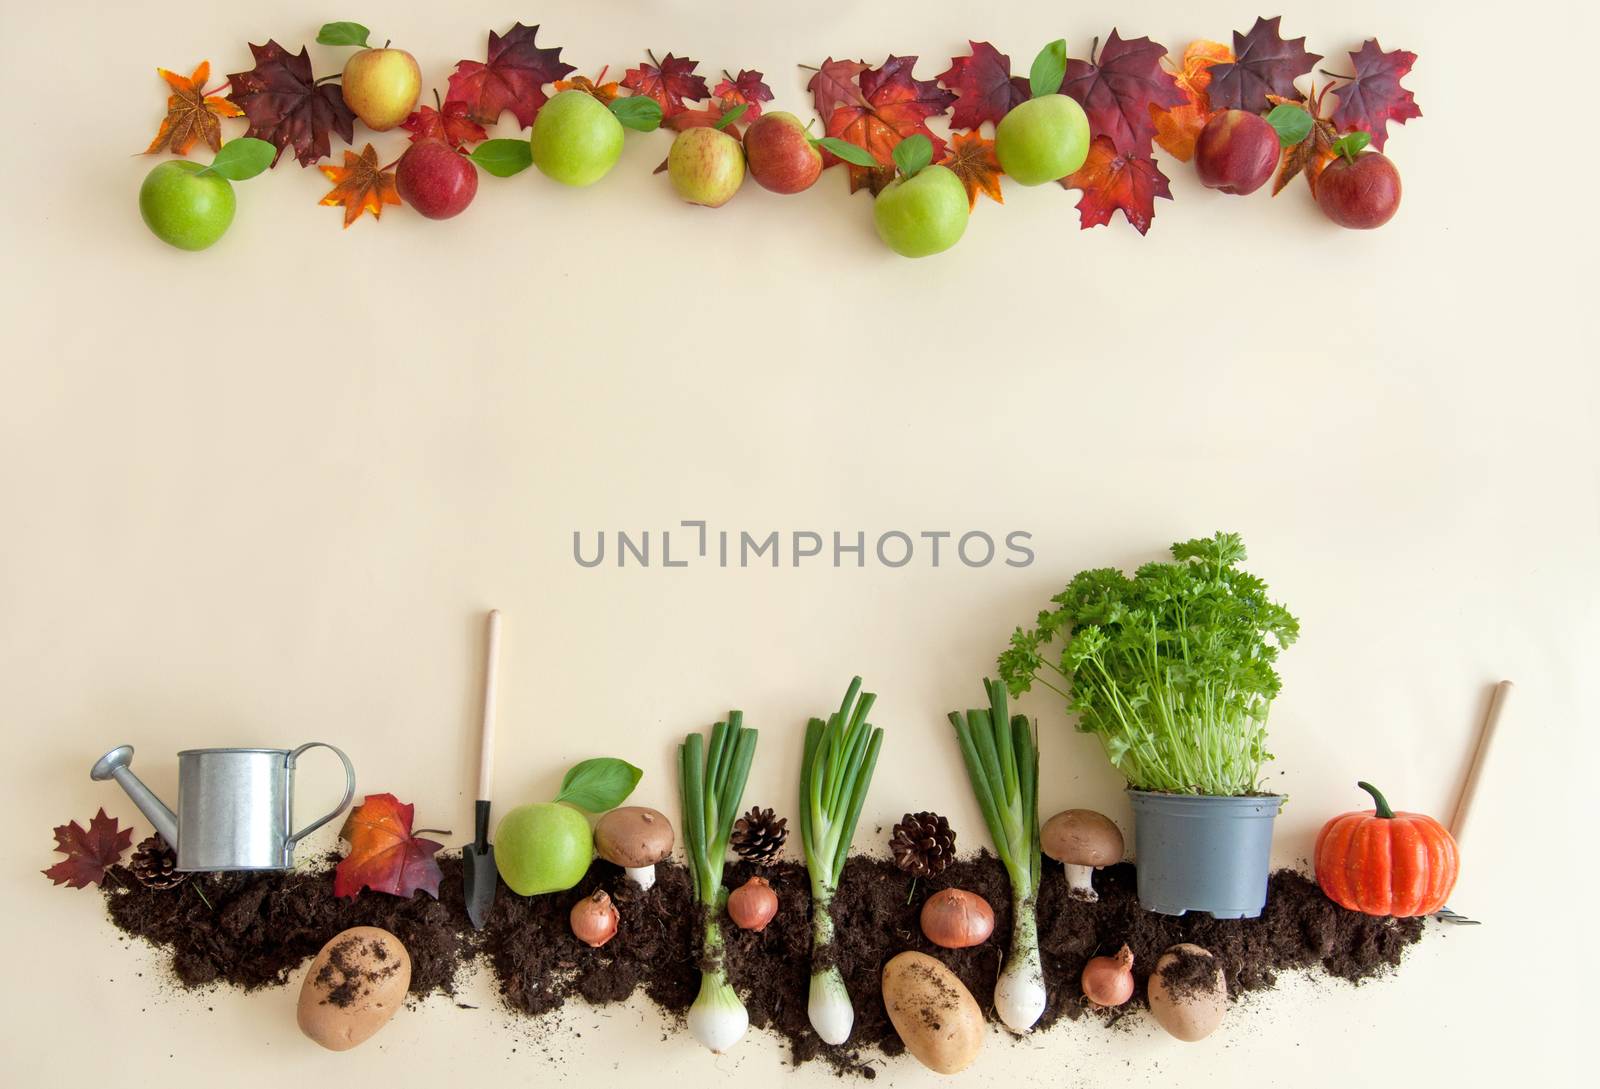 Autumn fruits and vegetables  by unikpix